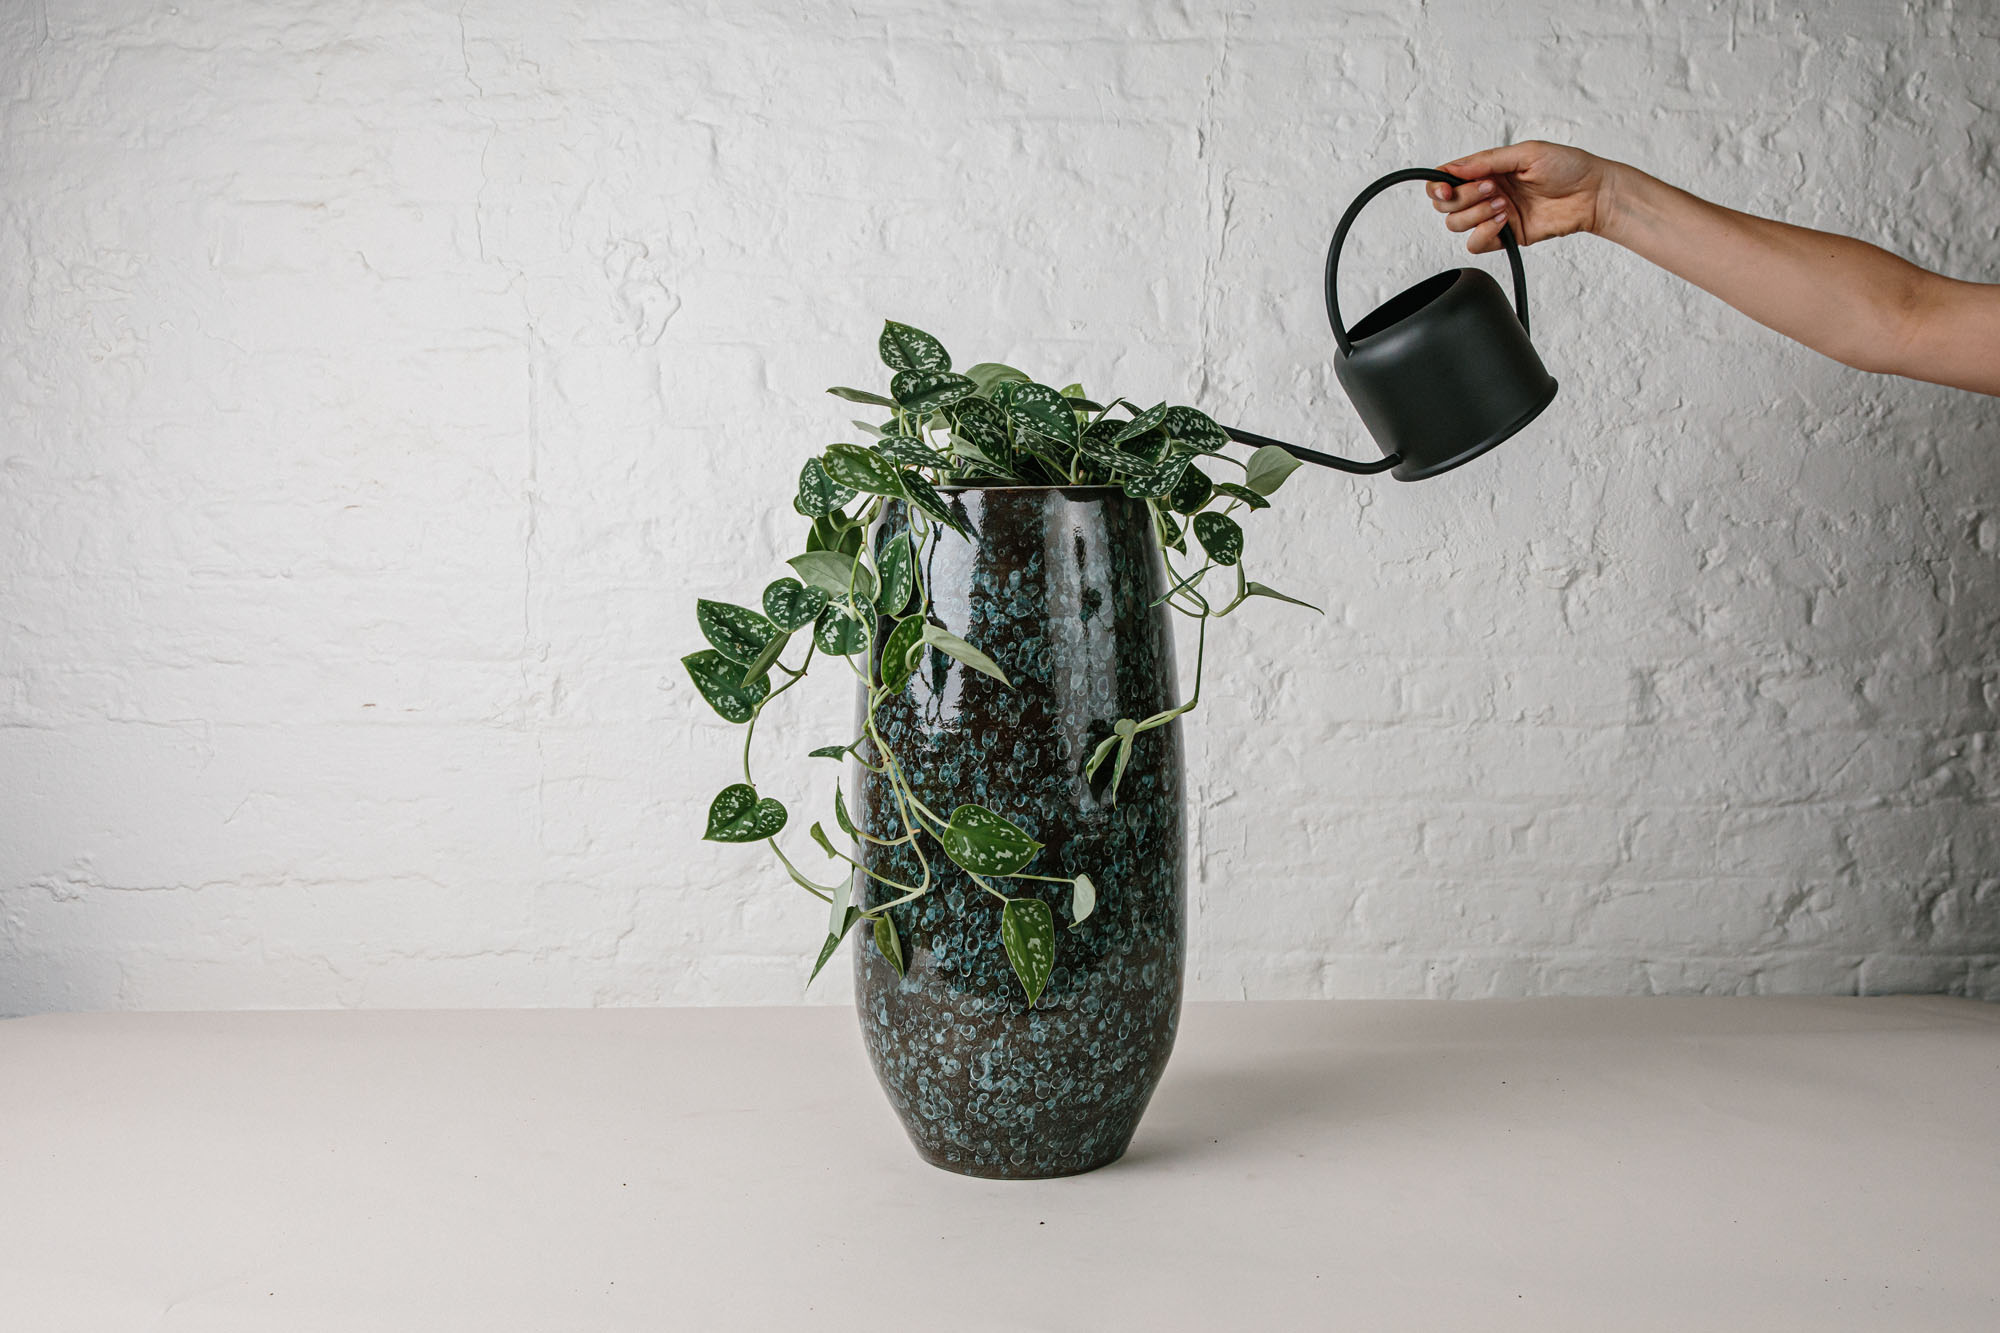 hand watering plant in pot with watering can